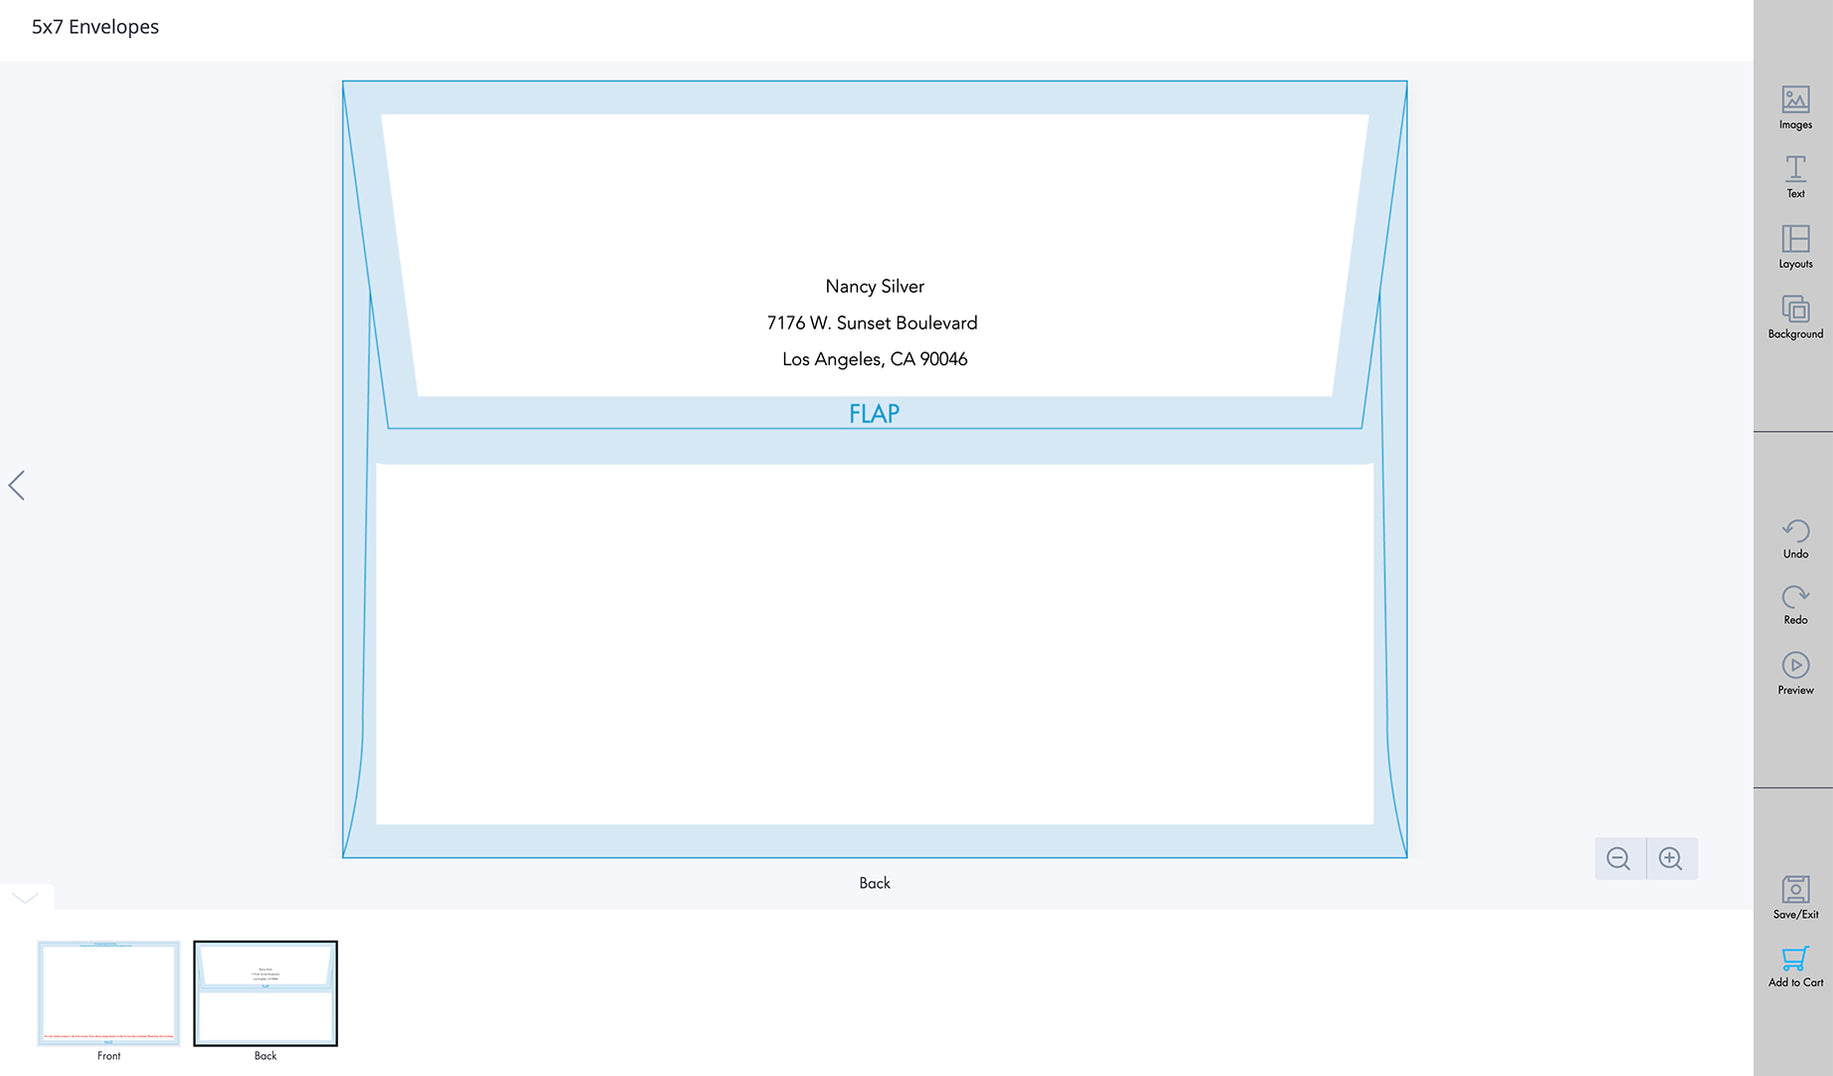 Create your own envelope design directly in our Design Online tool. Simple drag and drop, image upload and character editing means anyone can create sophisticated cards. No need to download any software. Check out our <a href="/pages/design-online">helpful tutorials</a>.